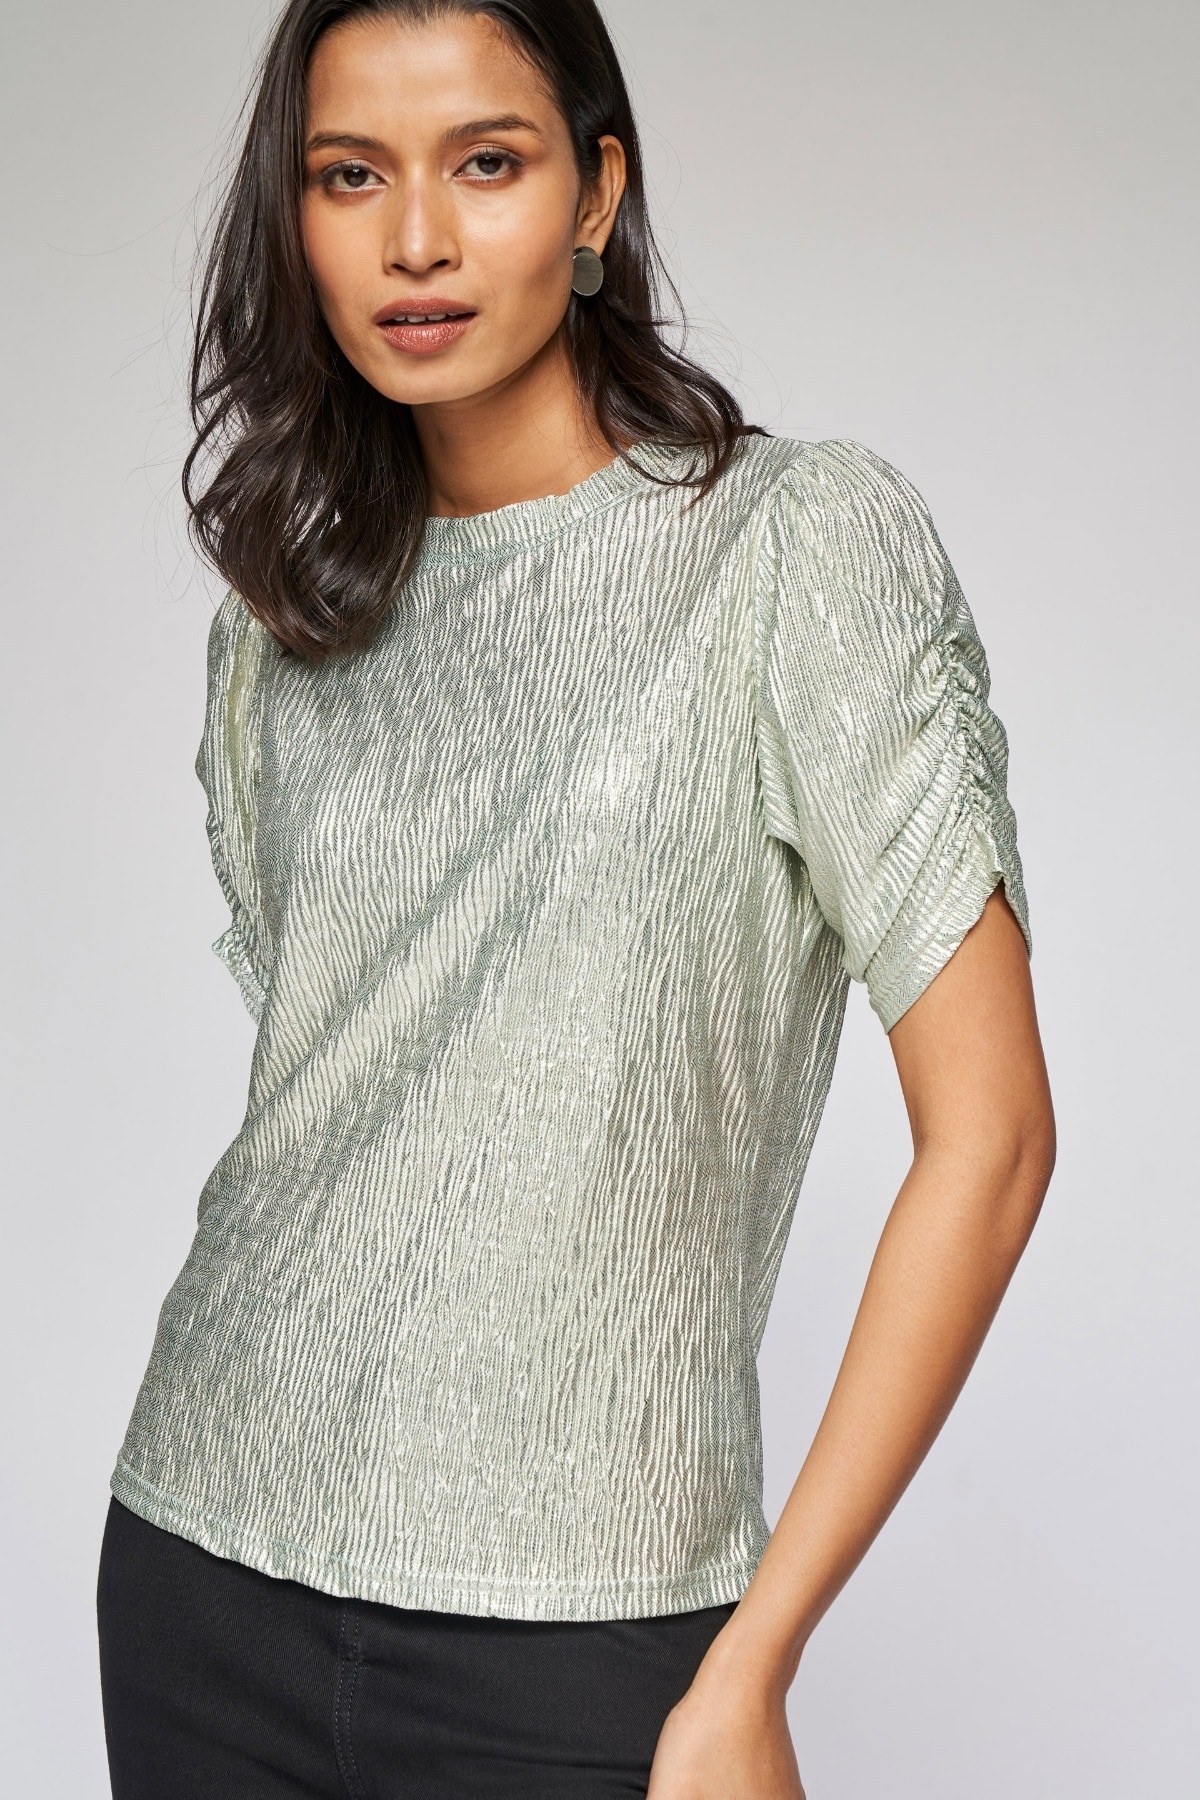 AND | Mint Self Design A-Line Top